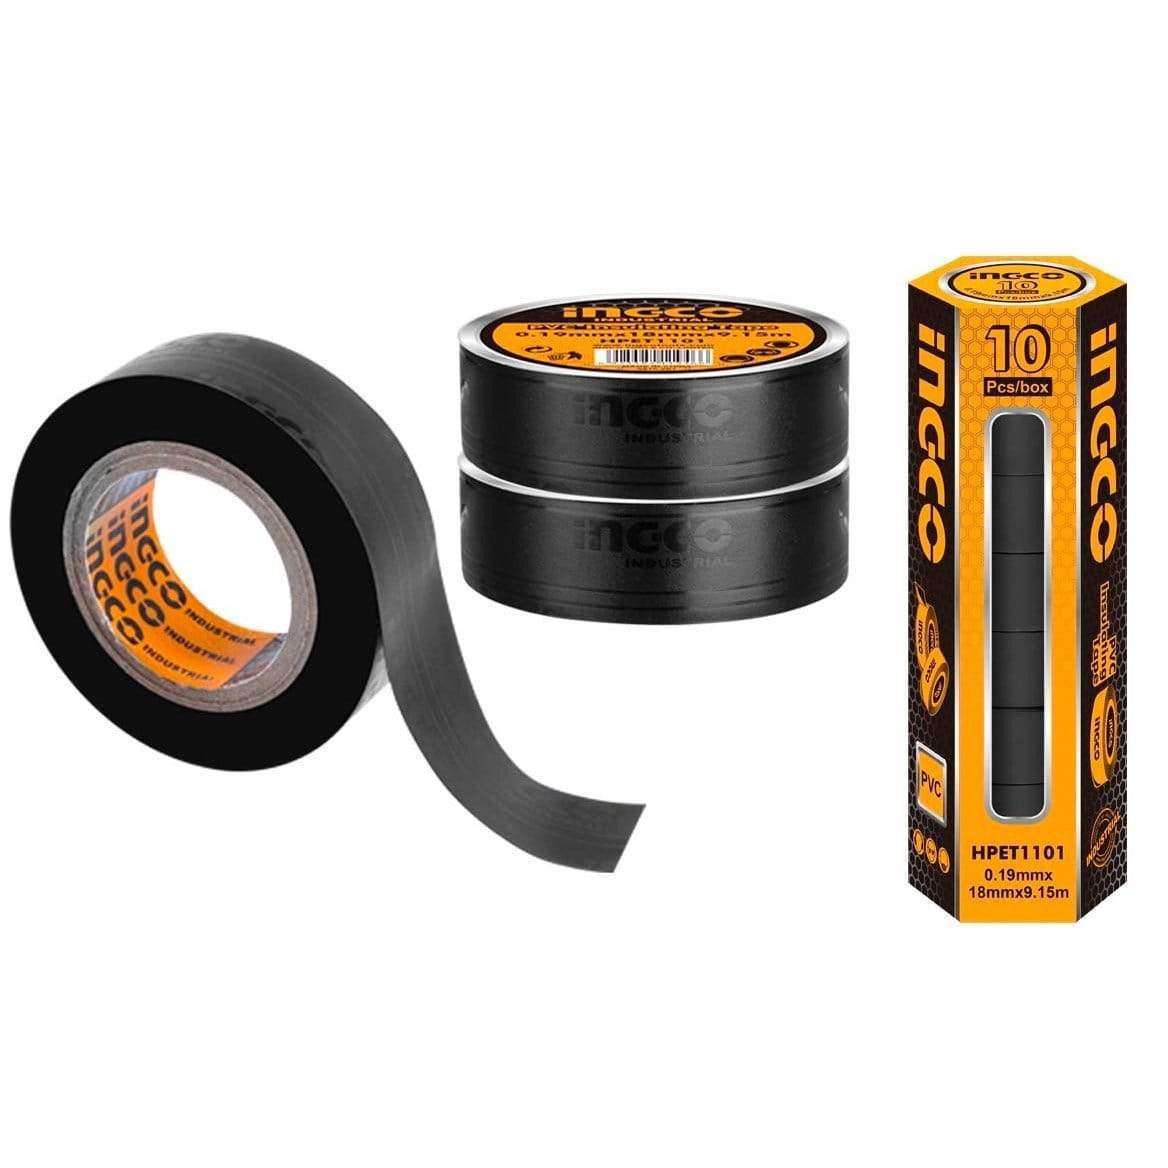 Ingco 10yards(9.15m) PVC Insulating Tape 10 Pieces Set - HPET1103 | Supply Master | Accra, Ghana Tools Building Steel Engineering Hardware tool